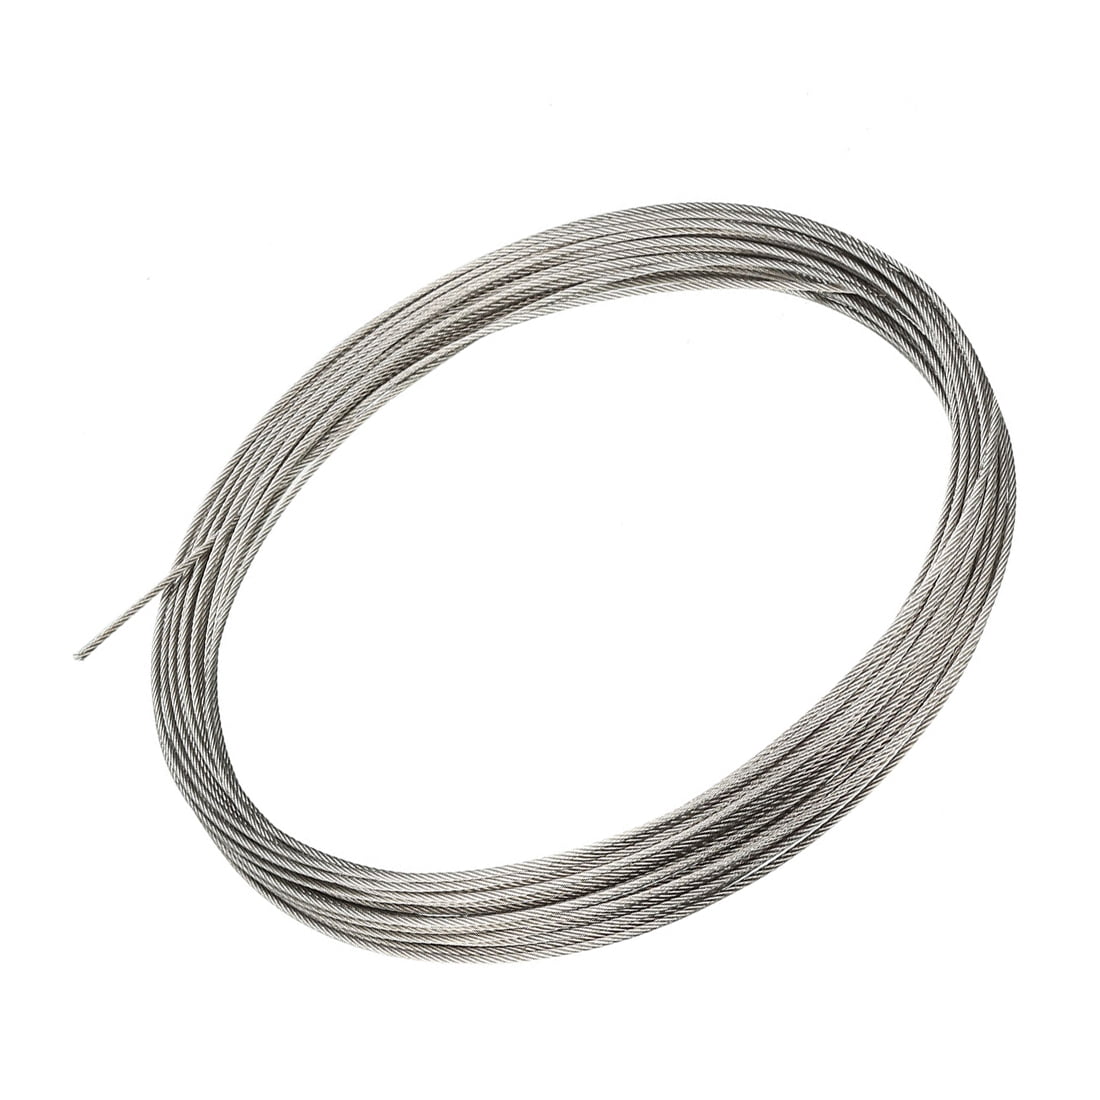 Pandahall Elite 20 Gauge 304 Stainless Steel Wire Rope 328 Ft